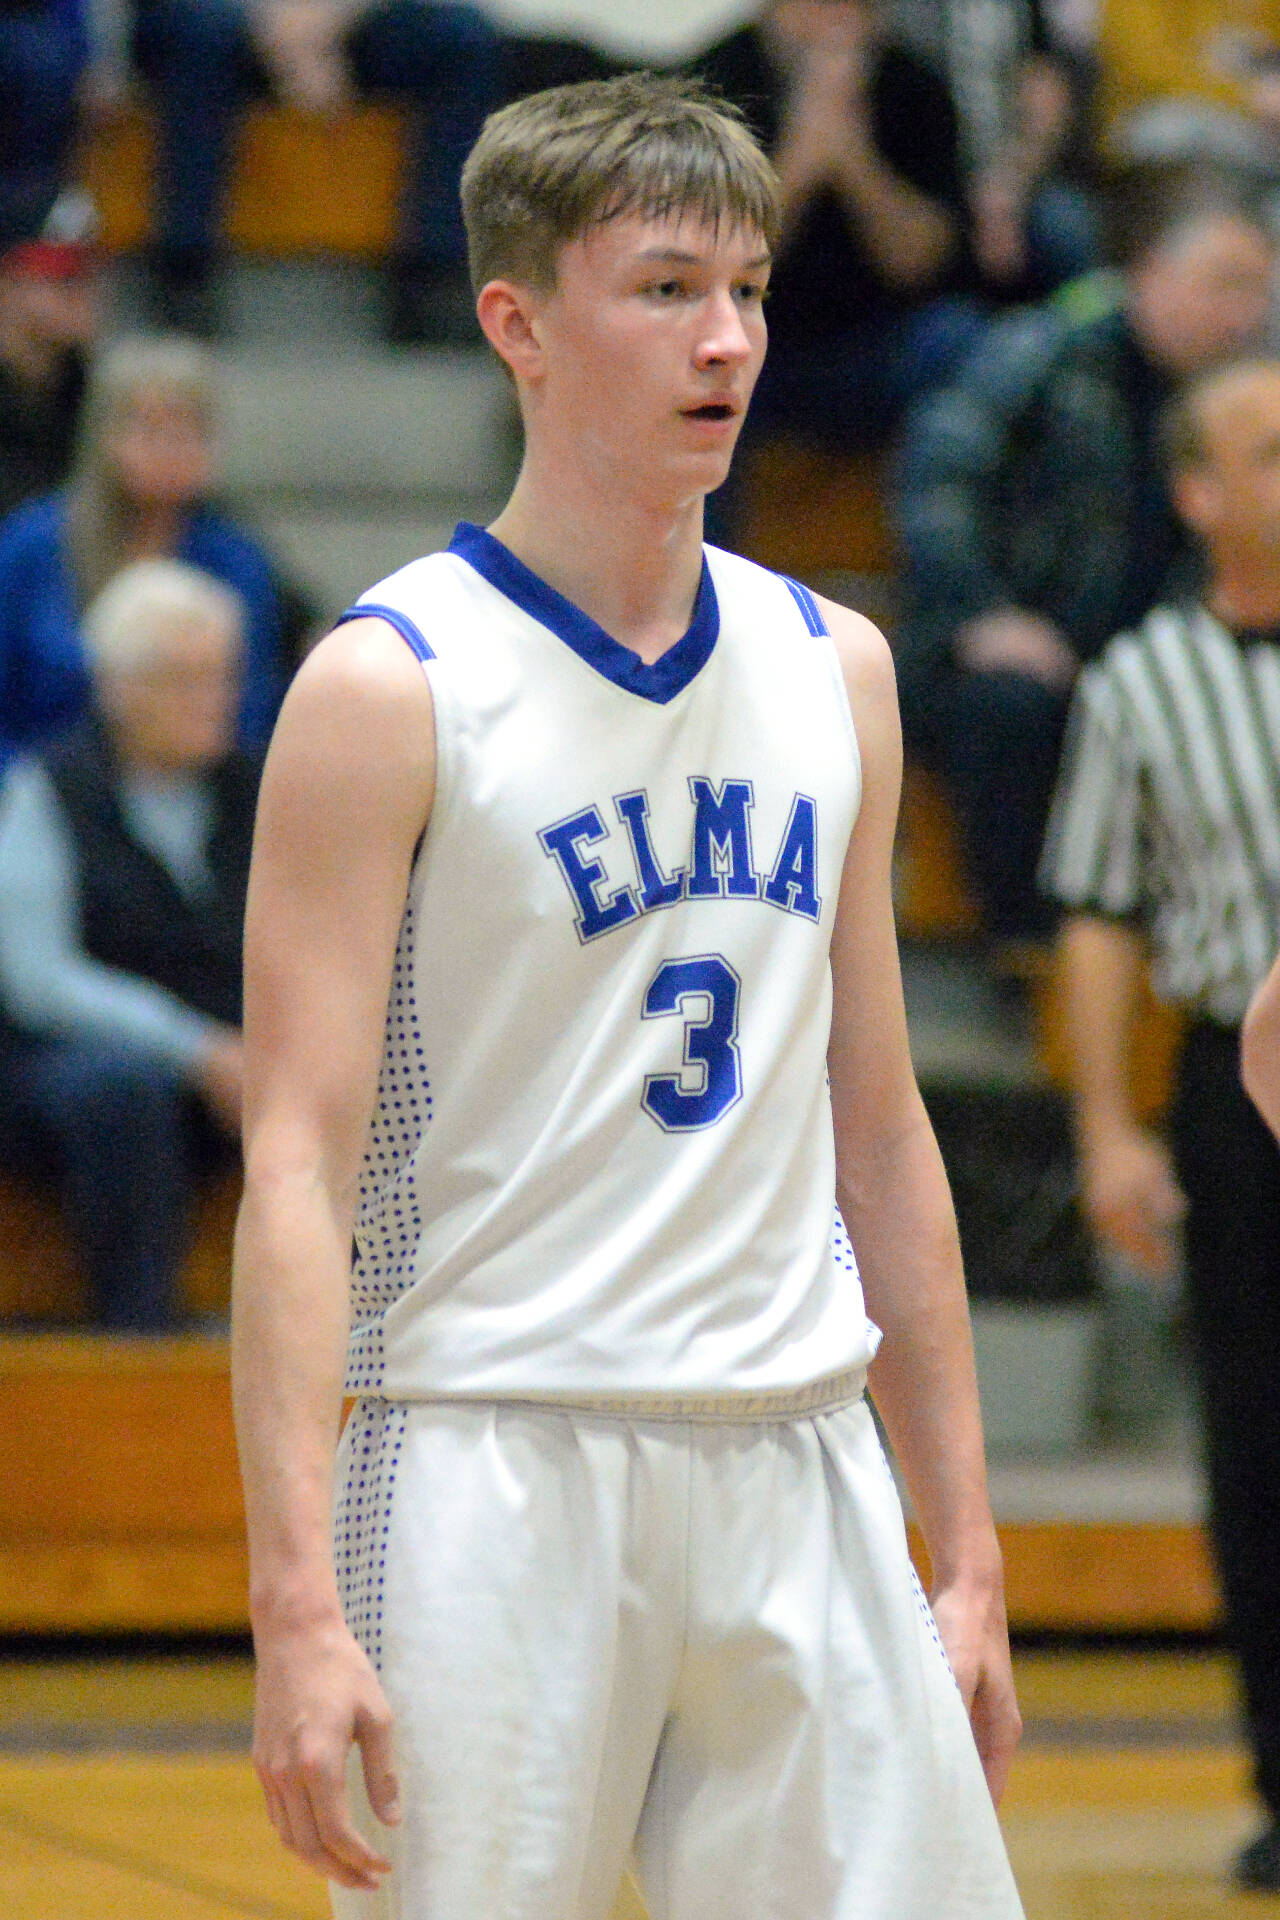 DAILY WORLD FILE PHOTO Elma junior forward AJ Holmes scored and was fouled with two seconds left in the game to give the Eagles a 47-45 victory over Seton Catholic in a 1A District 4 first-round playoff game on Friday in Vancouver.